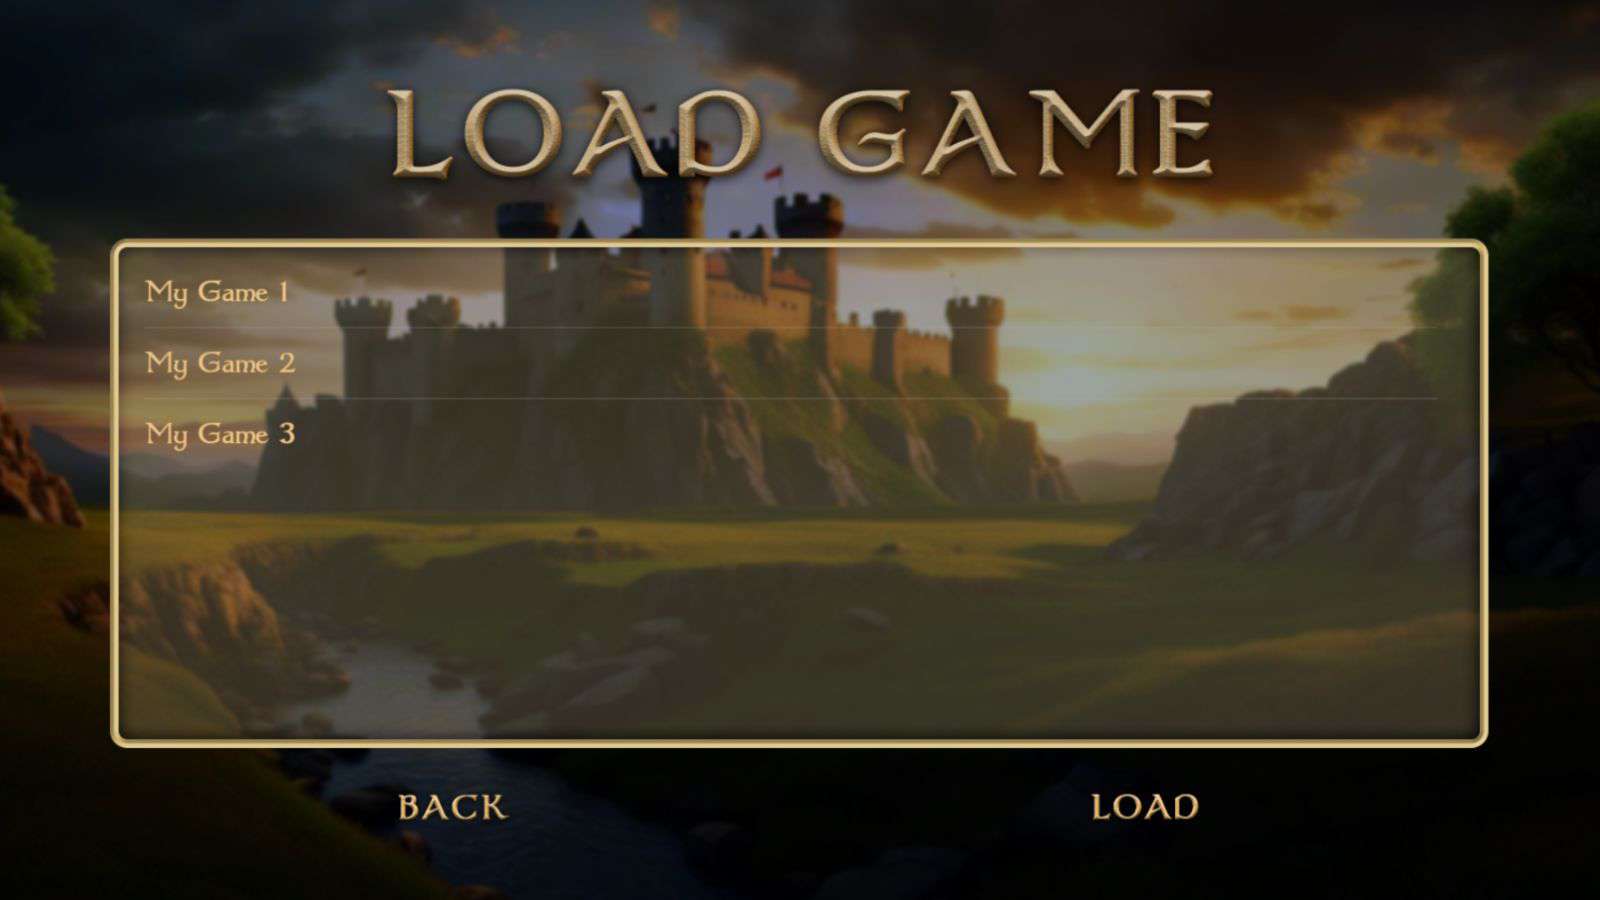 The 'Load Game' user interface scene of the example 'Medieval Times' game created in the Godot 4 engine